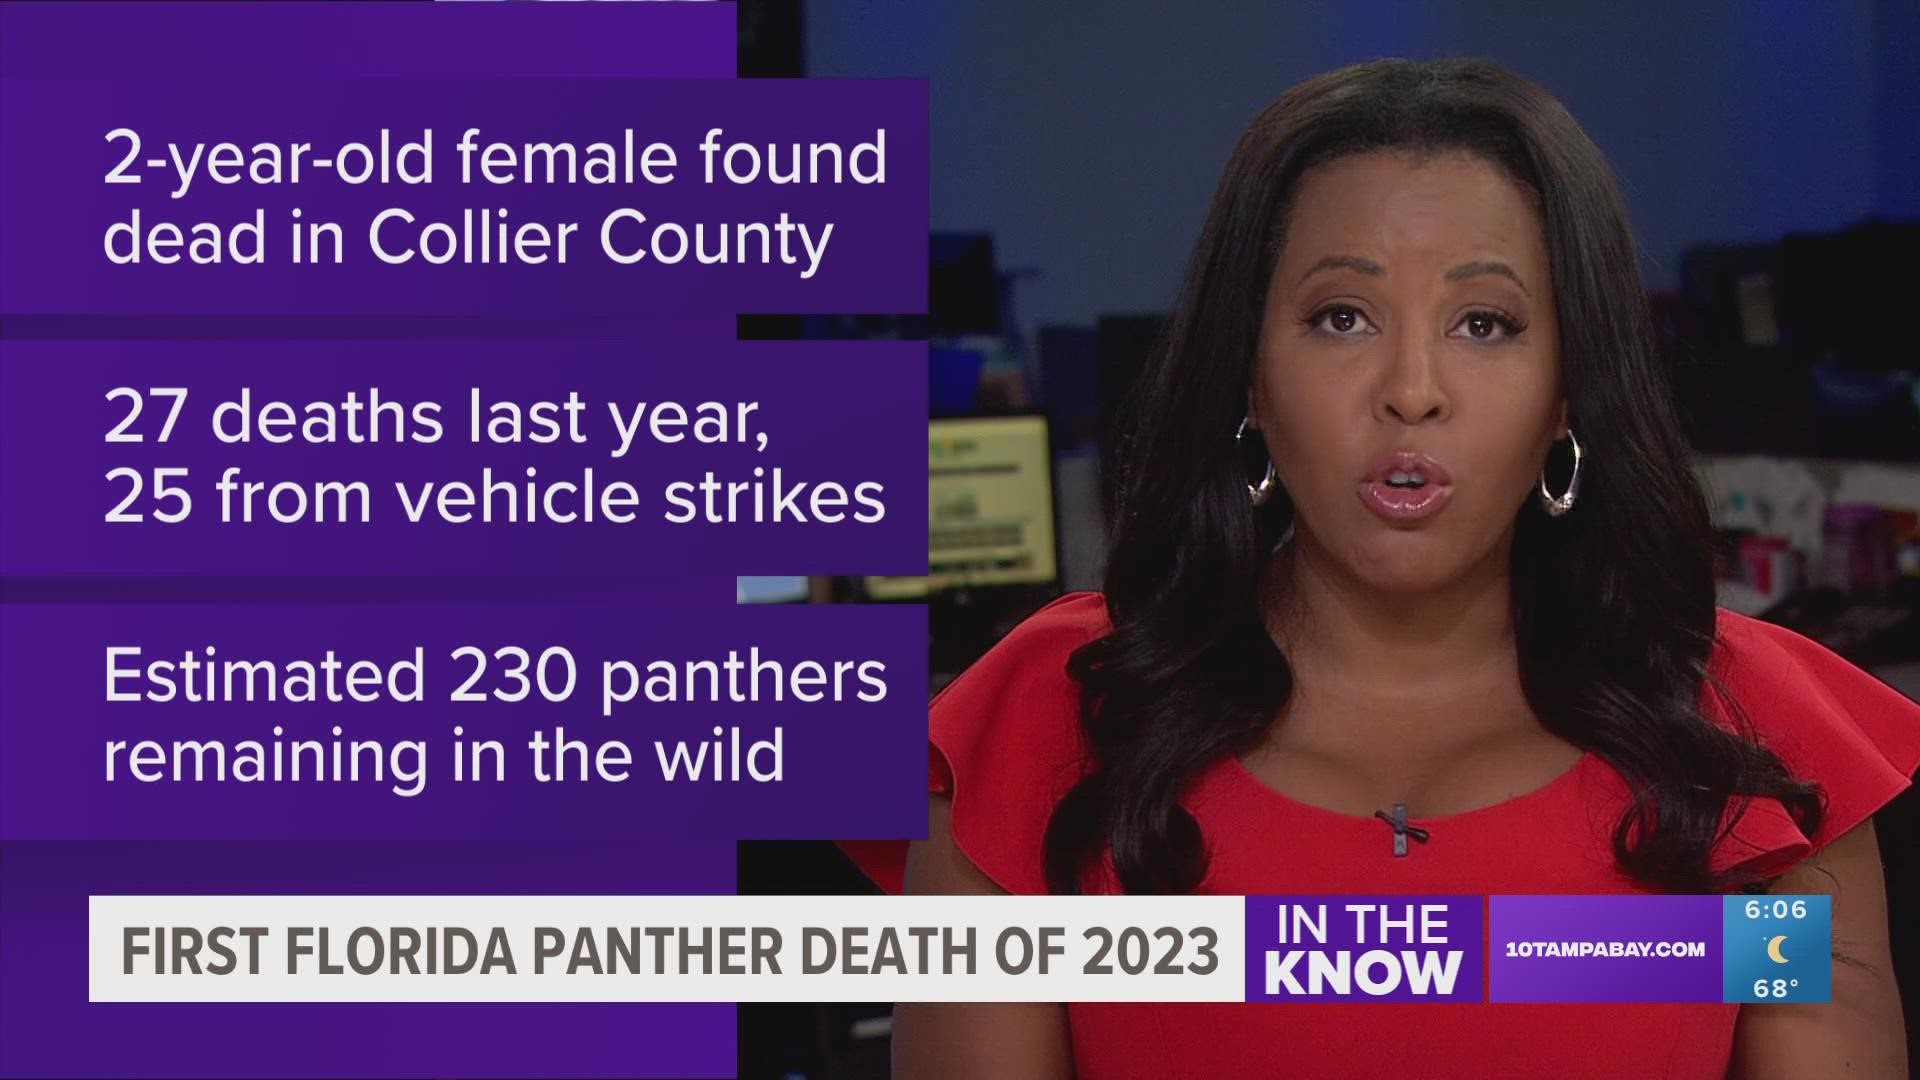 A total of 27 Florida panthers were reported killed in 2022, with 25 of those being from vehicle strikes.